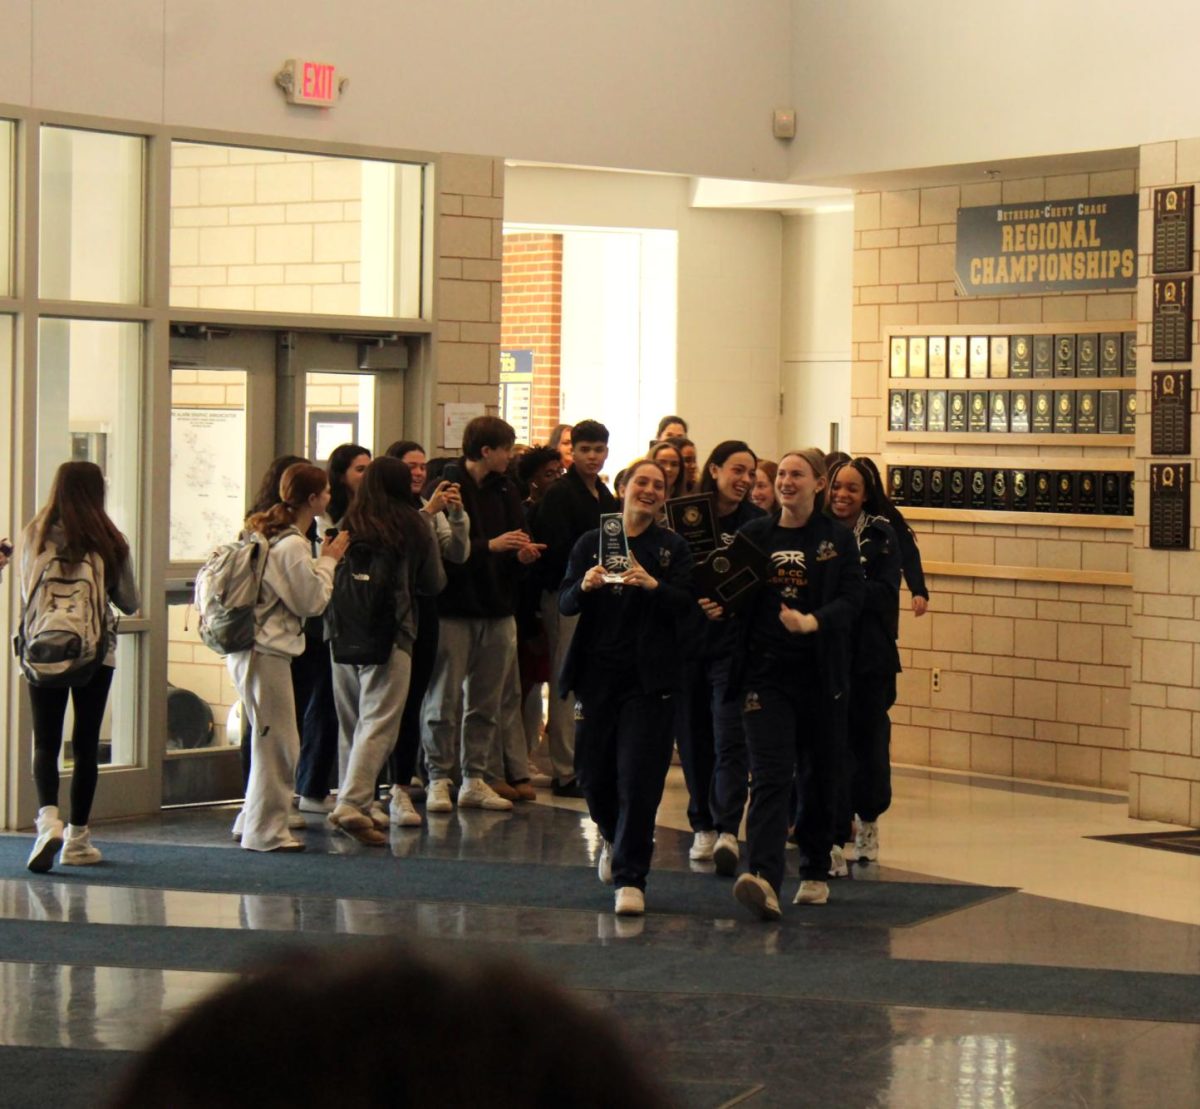 Girls Varsity Basketball parades through the halls while onlookers cheered, before heading to the semifinals. 